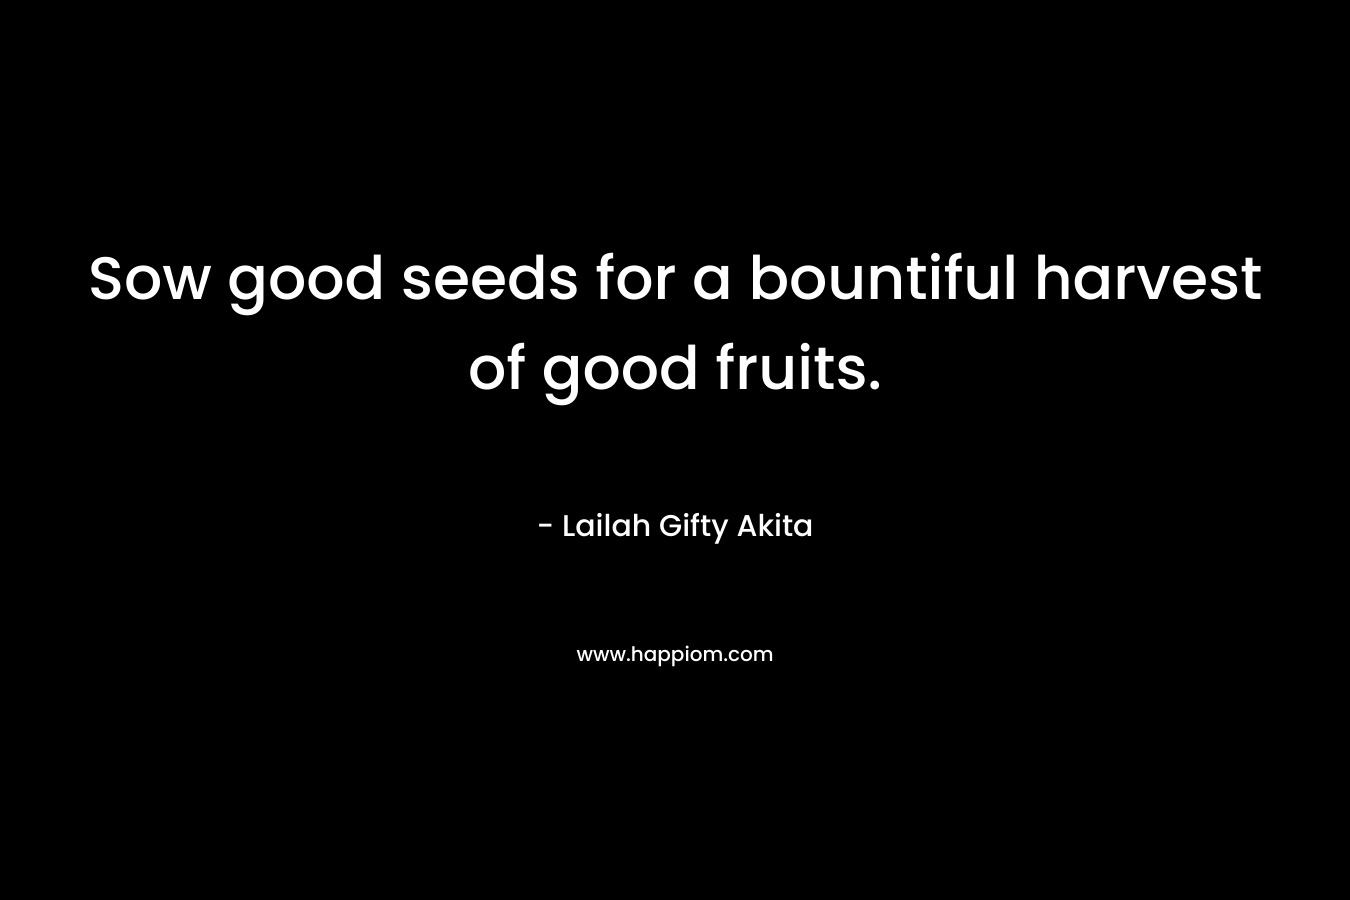 Sow good seeds for a bountiful harvest of good fruits.